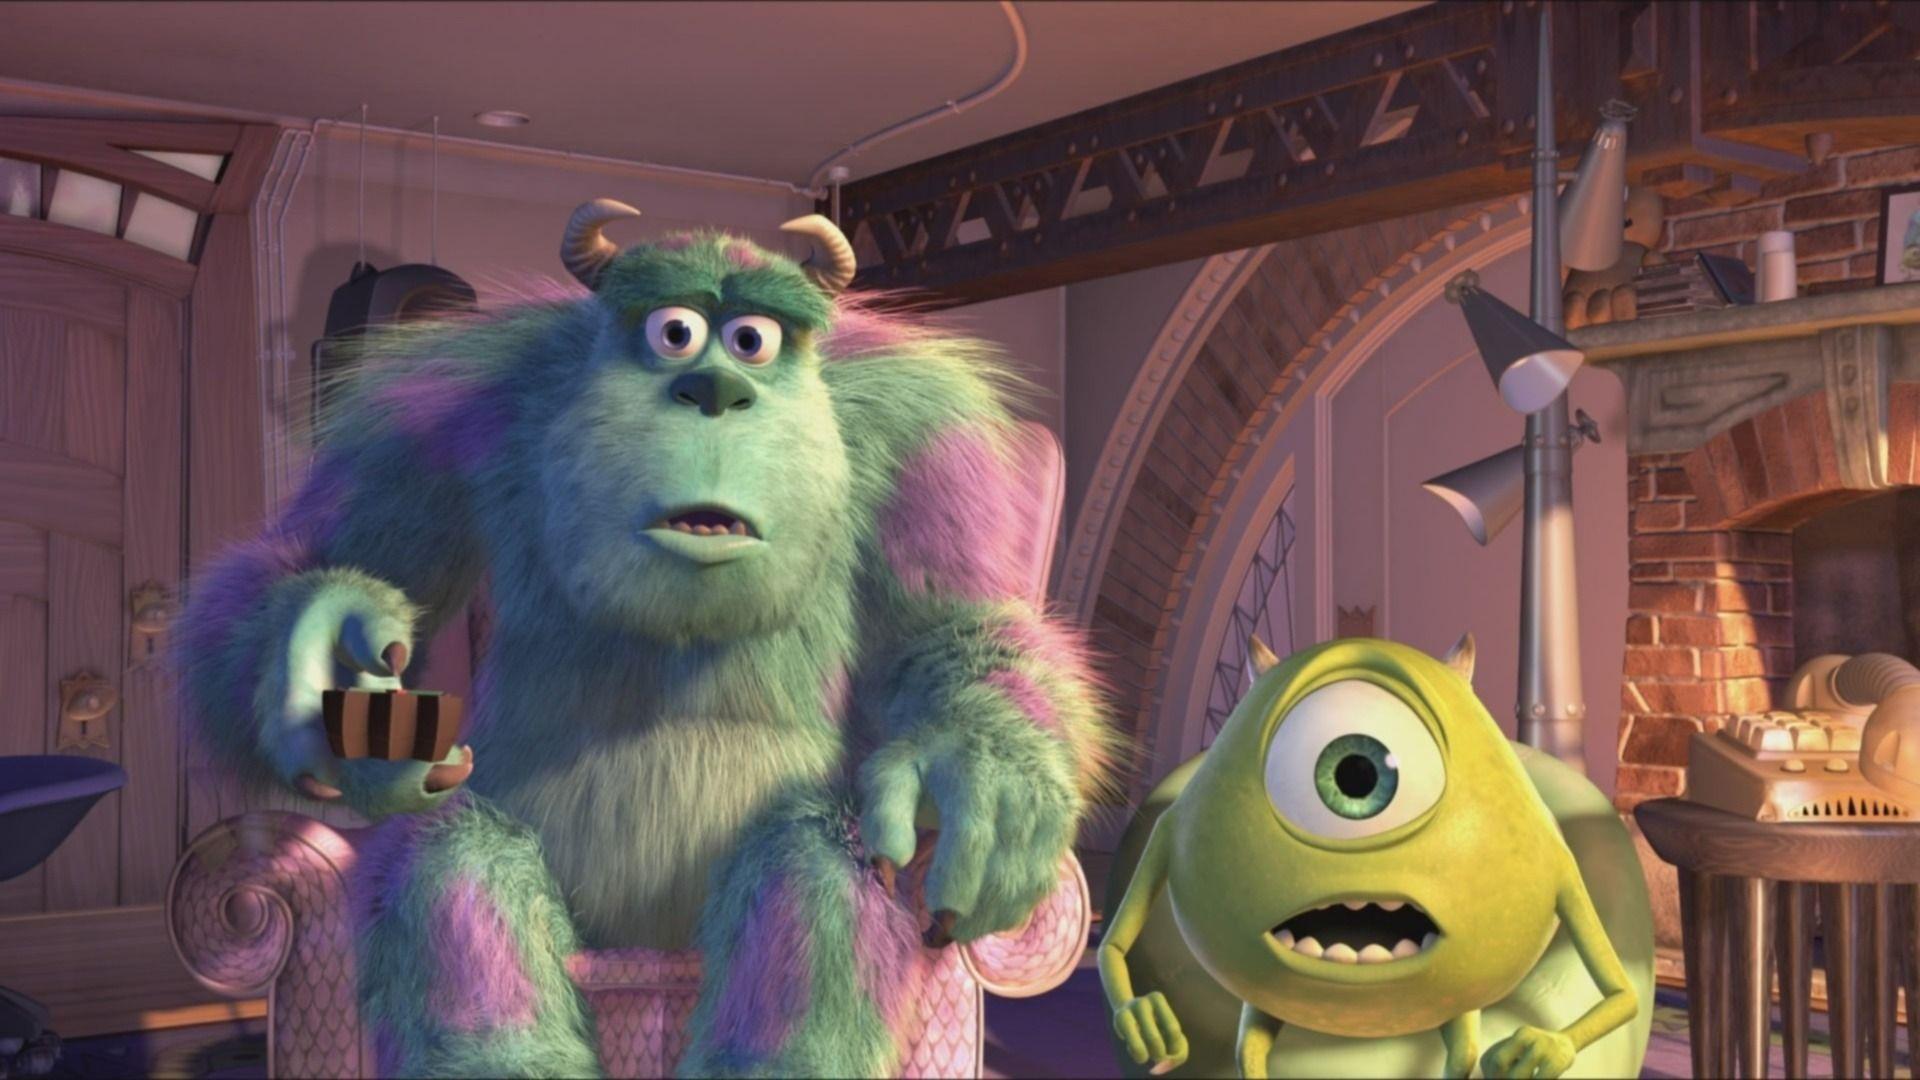 Gallery For > Monsters Inc Wallpaper